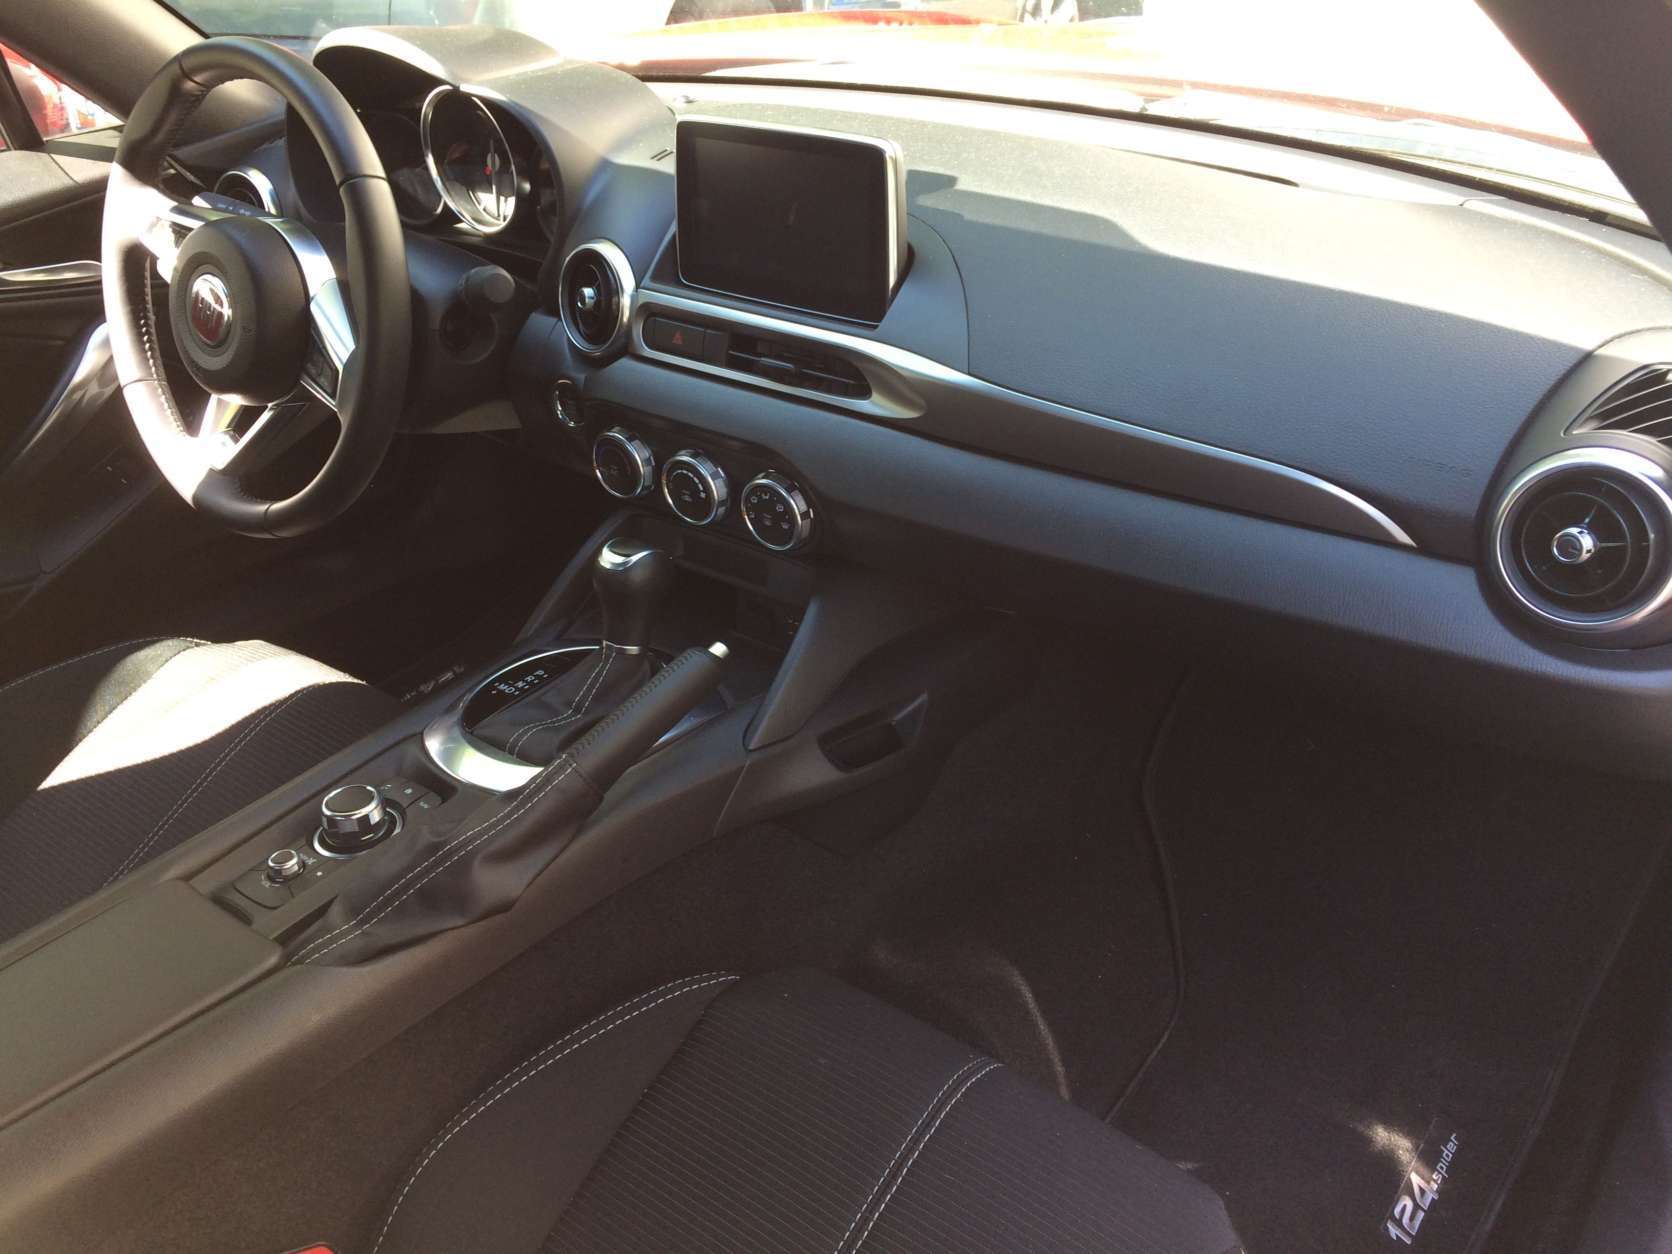 The inside of the Fiat 124 Spider seems more upscale also, with more soft- touch materials and nicer plastics. (WTOP/Mike Parris) 